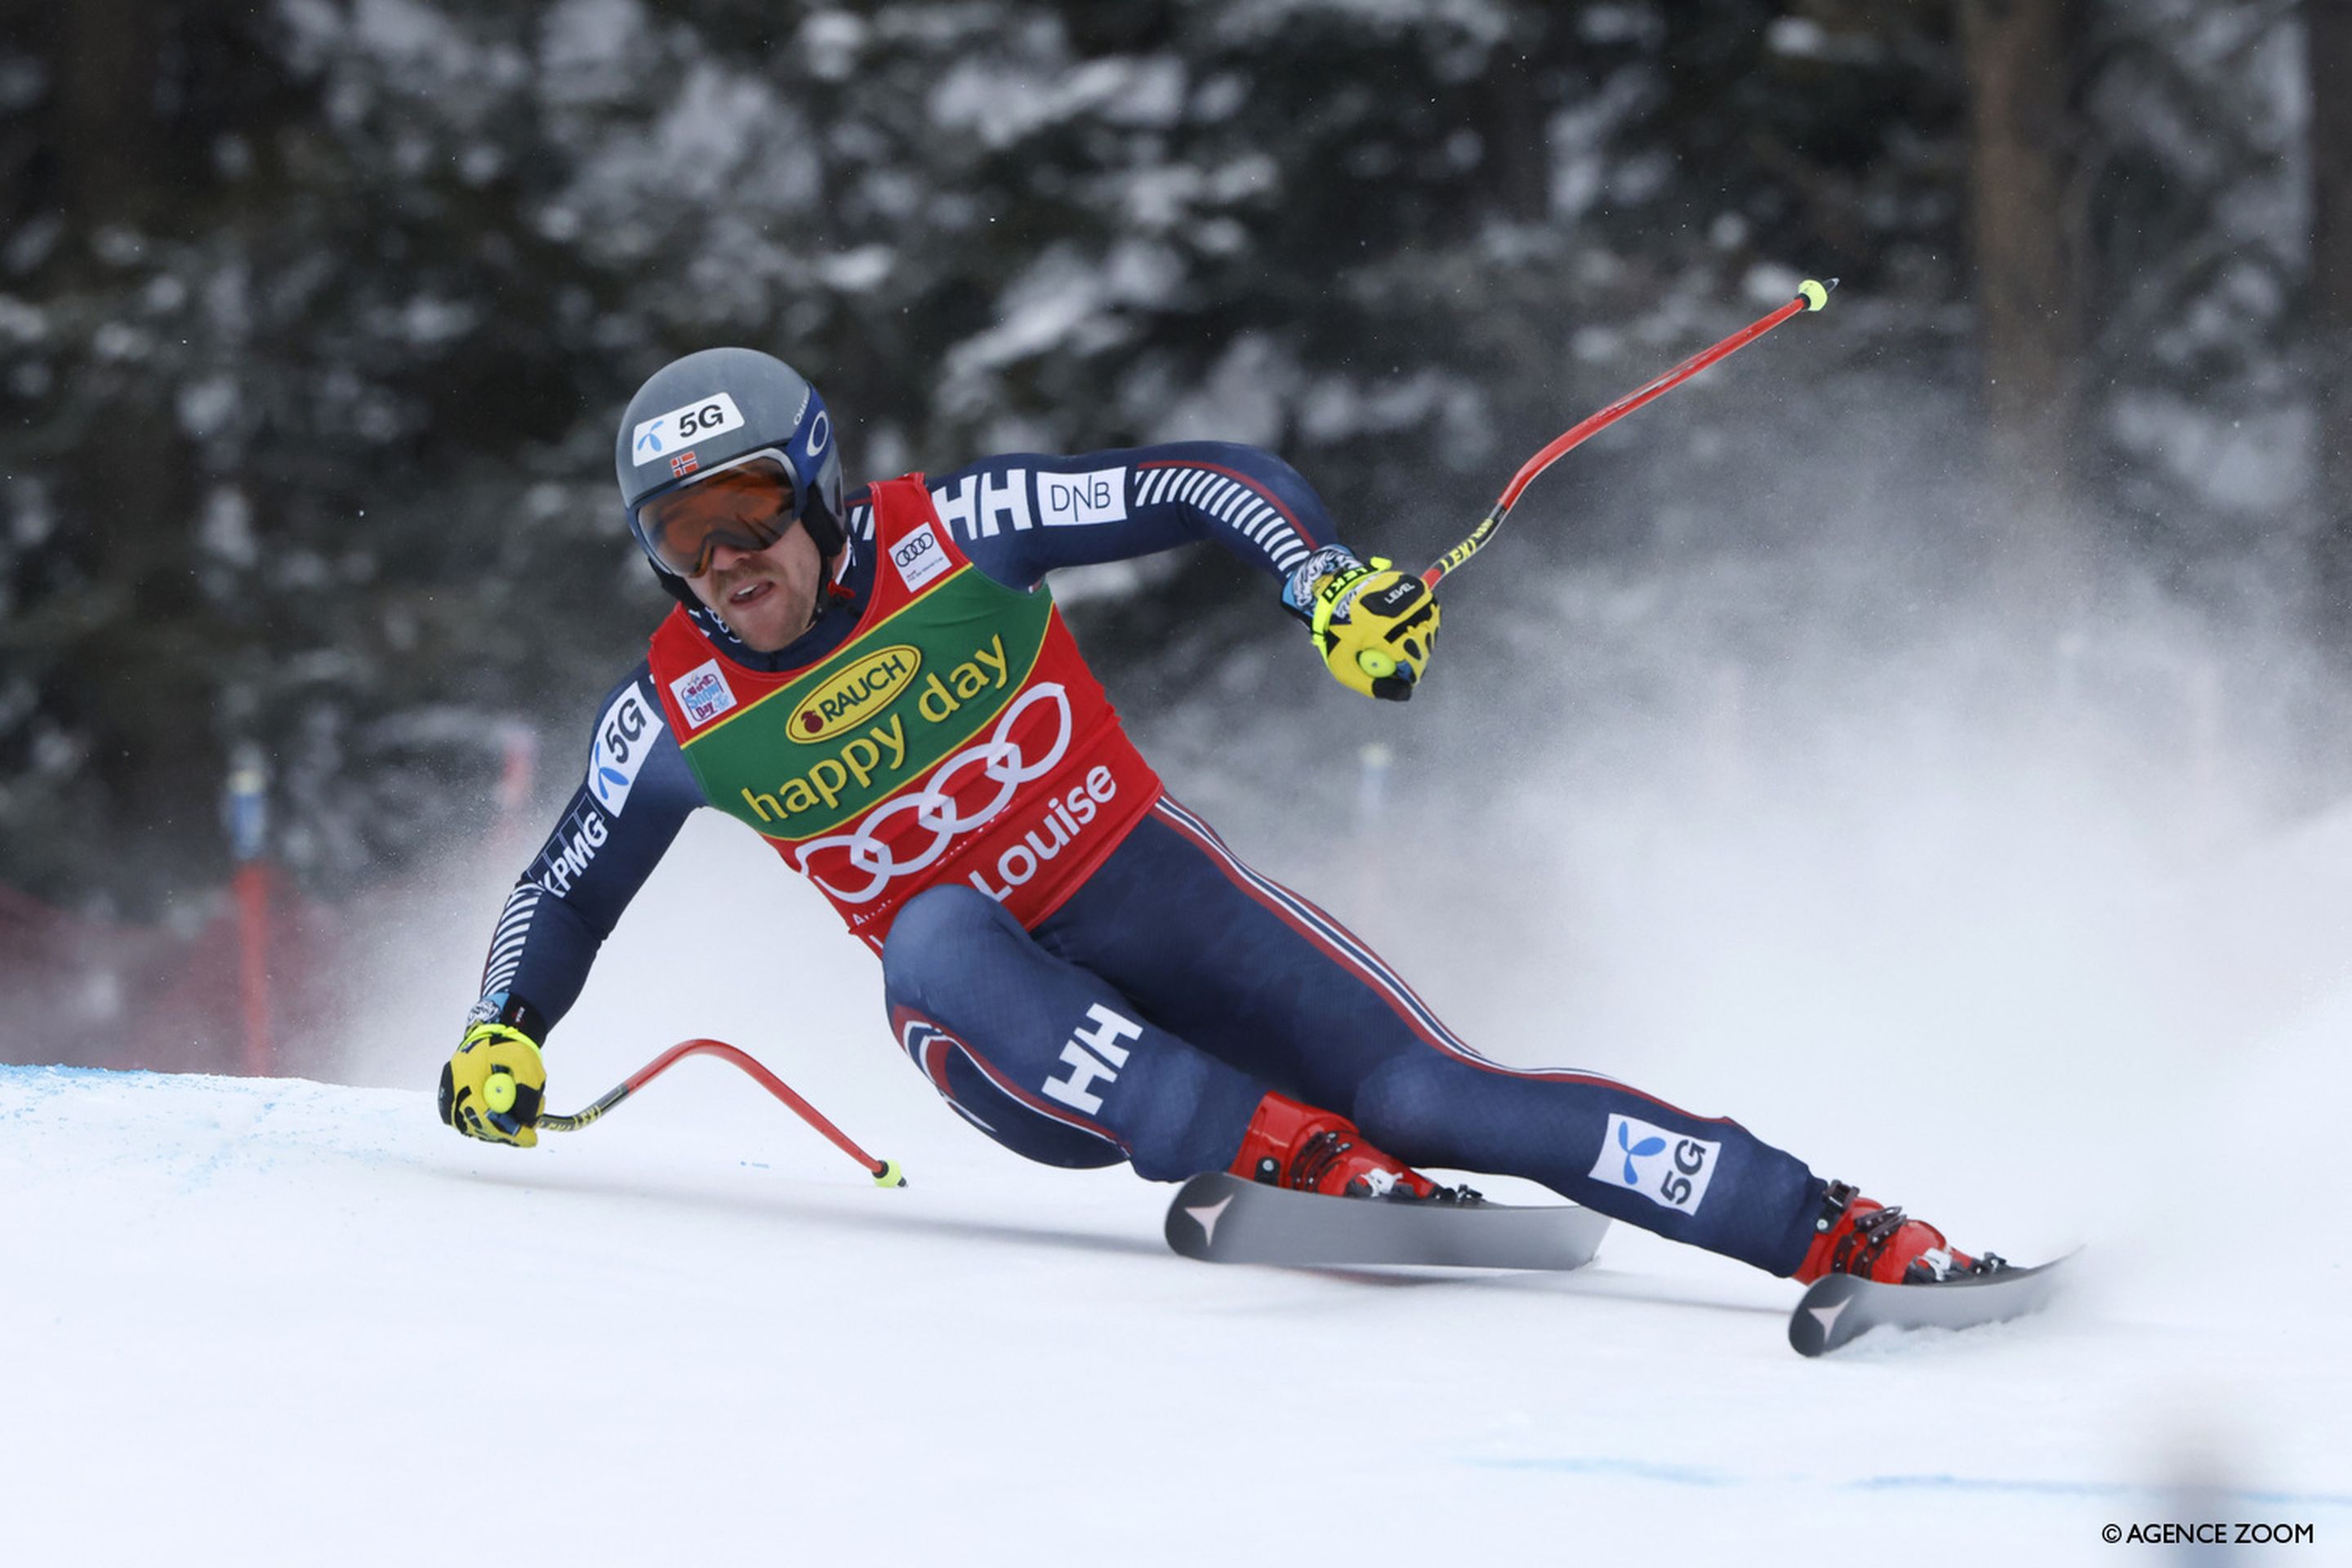 Aleksander Aamodt Kilde (NOR) leaves Lake Louise with two podiums (Agence Zoom)